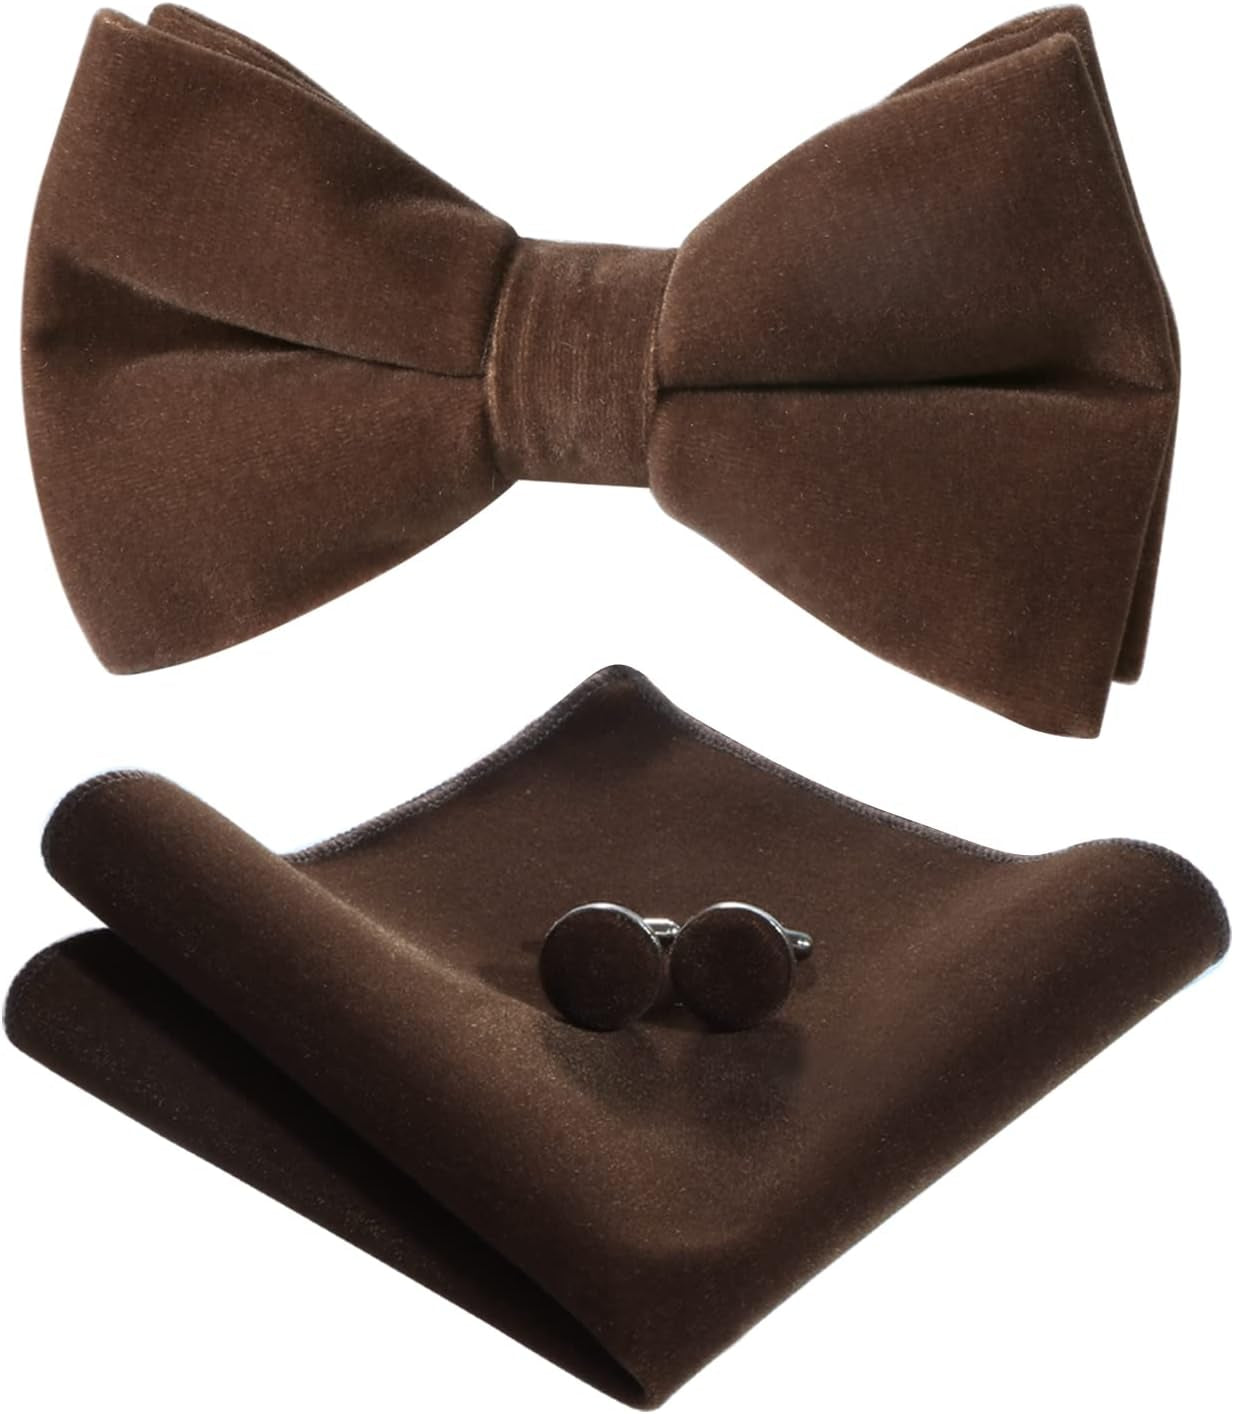 HOULIFE Men'S Pre-Tied Bowties Velvet Solid Color Adjustable Bow Tie and Pocket Square with Cufflinks for Wedding Party